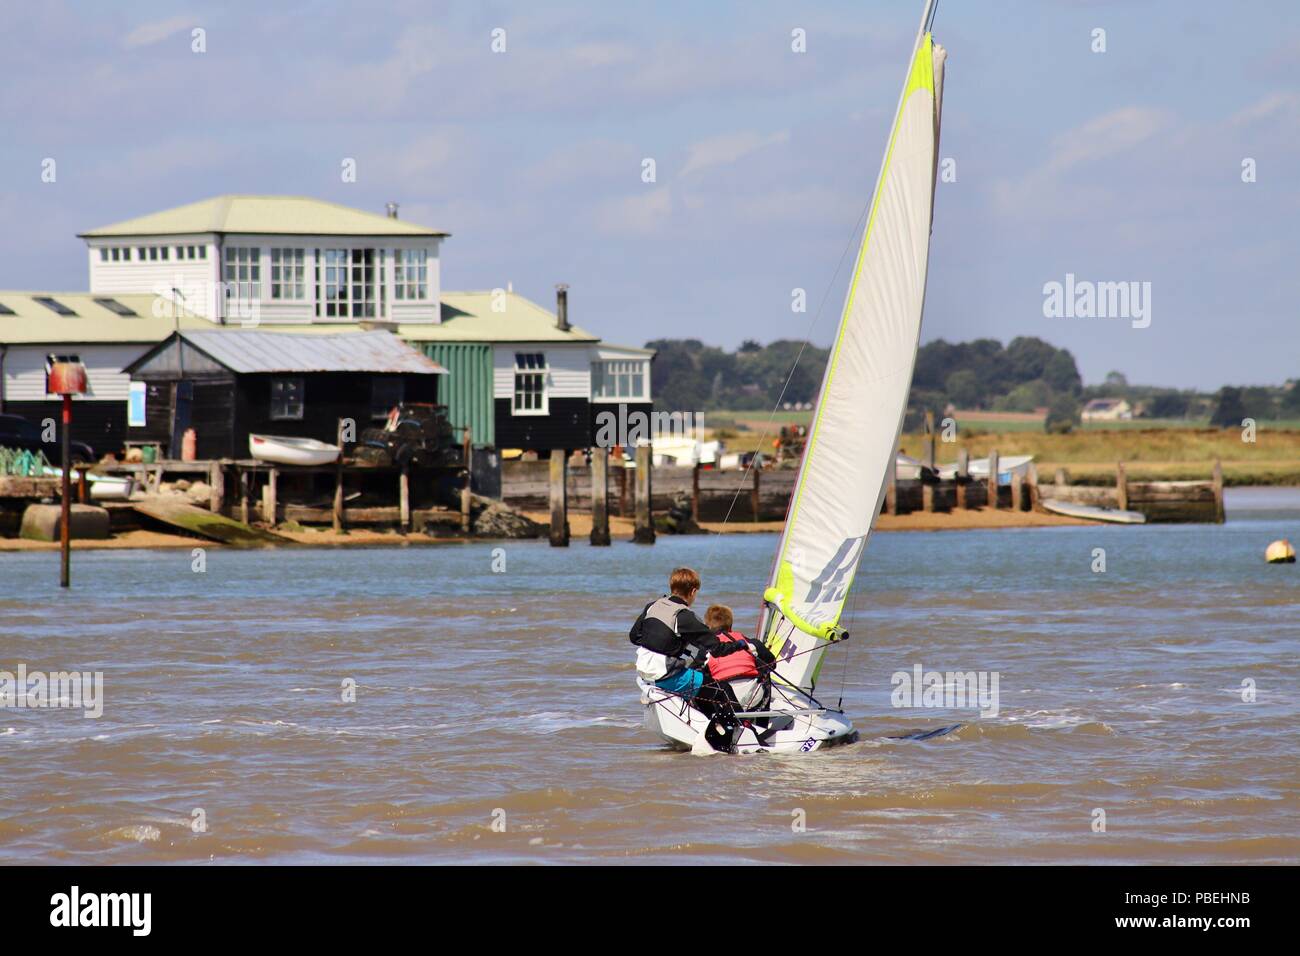 Suffolk, UK. 28th July 2018. UK Weather: Dinghy sailors contending with strong gusty winds this morning on the River Deben at Felixstowe Ferry, Suffolk. Credit: Angela Chalmers/Alamy Live News Stock Photo